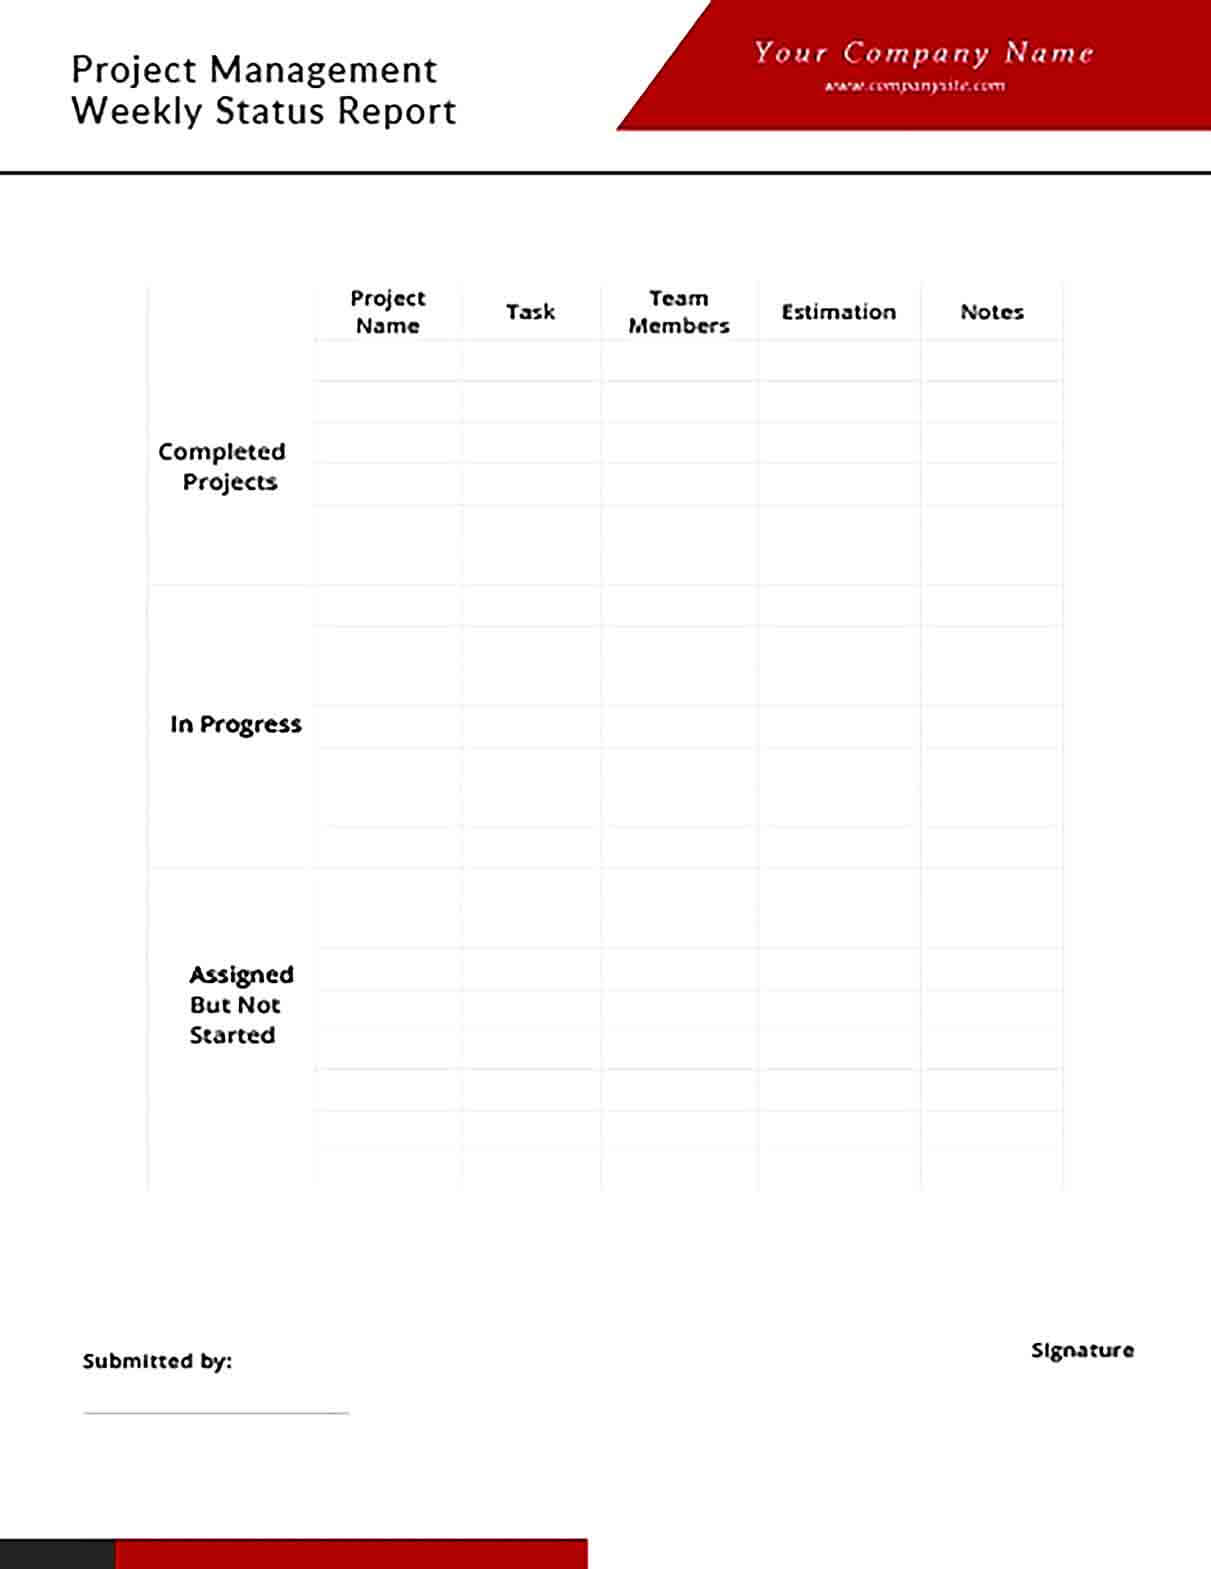 Sample project management weekly status report Slider